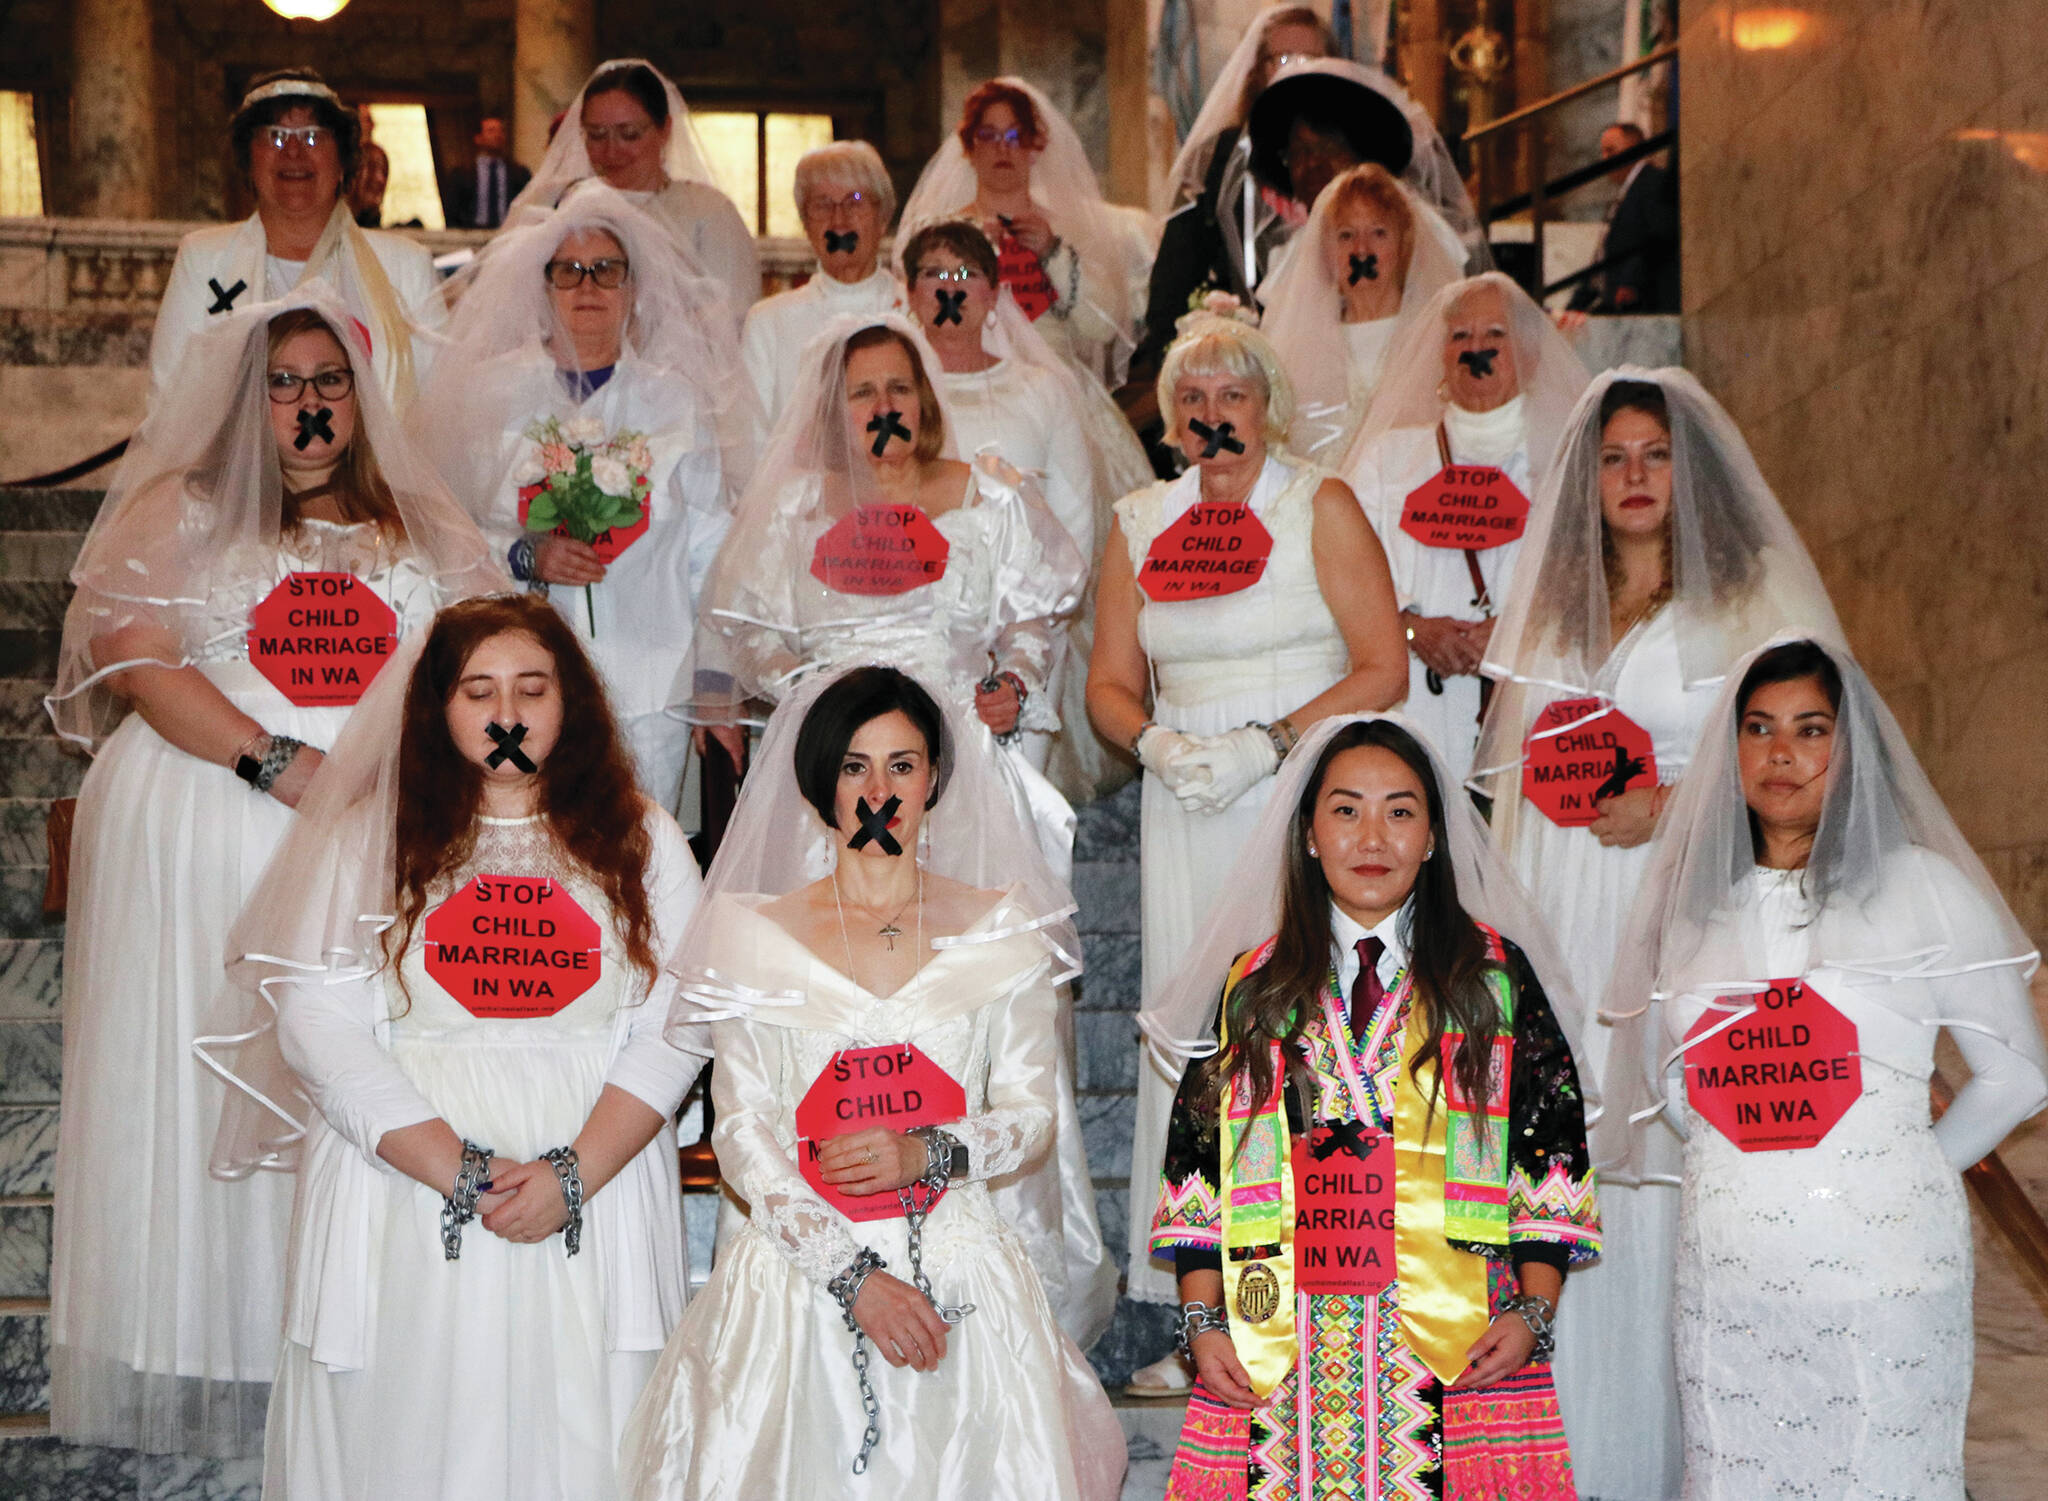 Photo by Aspen Anderson/Washington State Journal / Kate Yang (first row, second from right) protests child marriages in Olympia wearing a colorful wedding dress to honor her Hmong heritage.